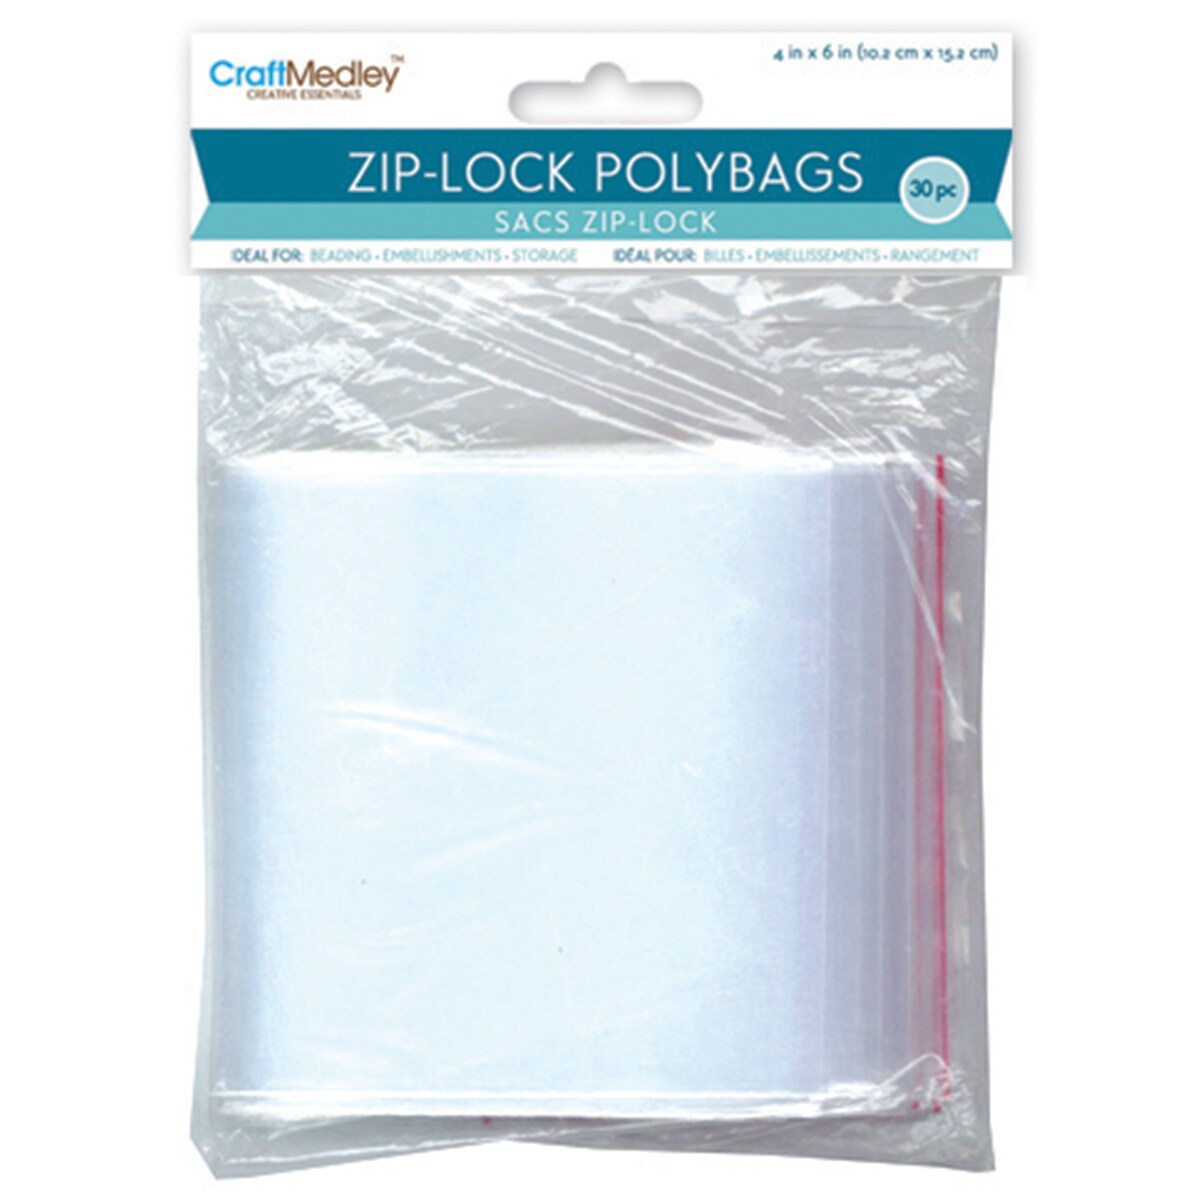 Bizroma Small Vacuum Storage Bag Space Saving Compression Bags (8-Pack)  SM-S008 - The Home Depot